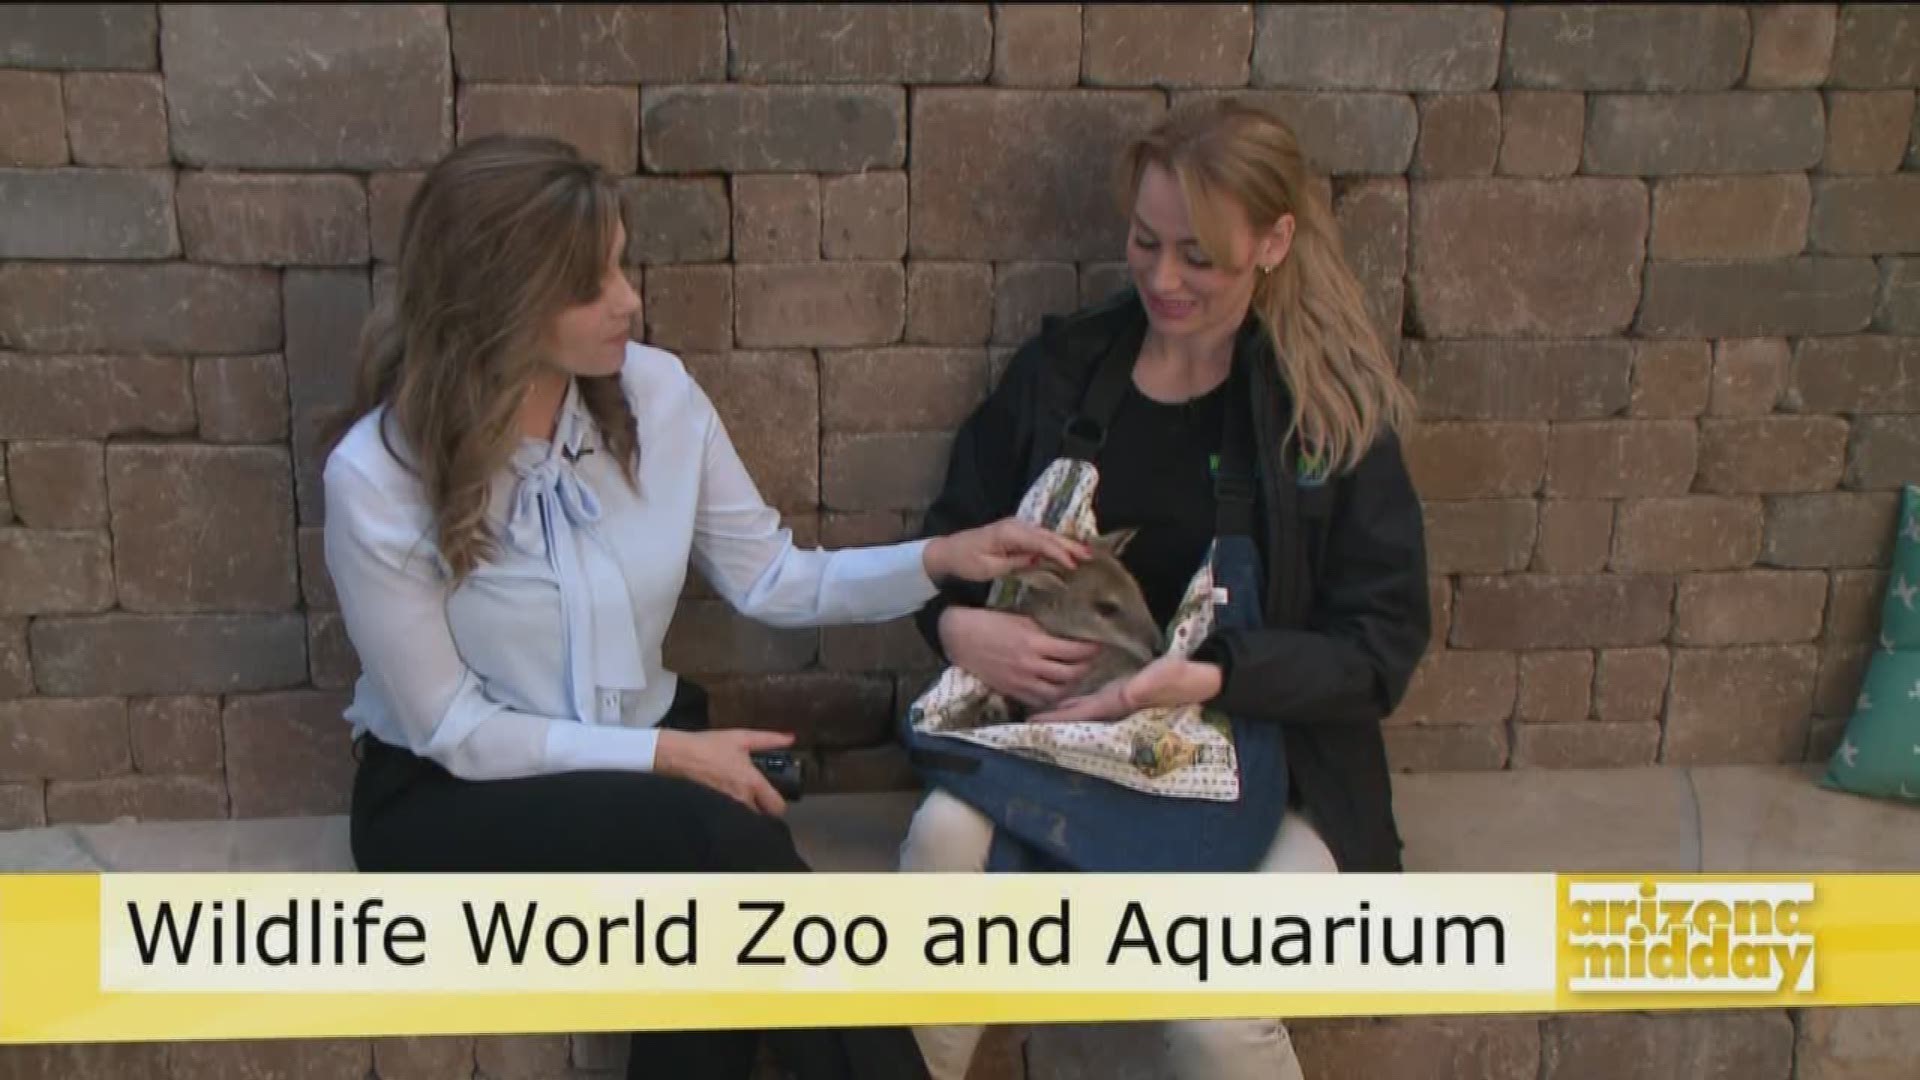 Kristy from Wildlife World Zoo Aquarium, brings in Sheila the Wallaby and tells us about all the fun you can have at the zoo.